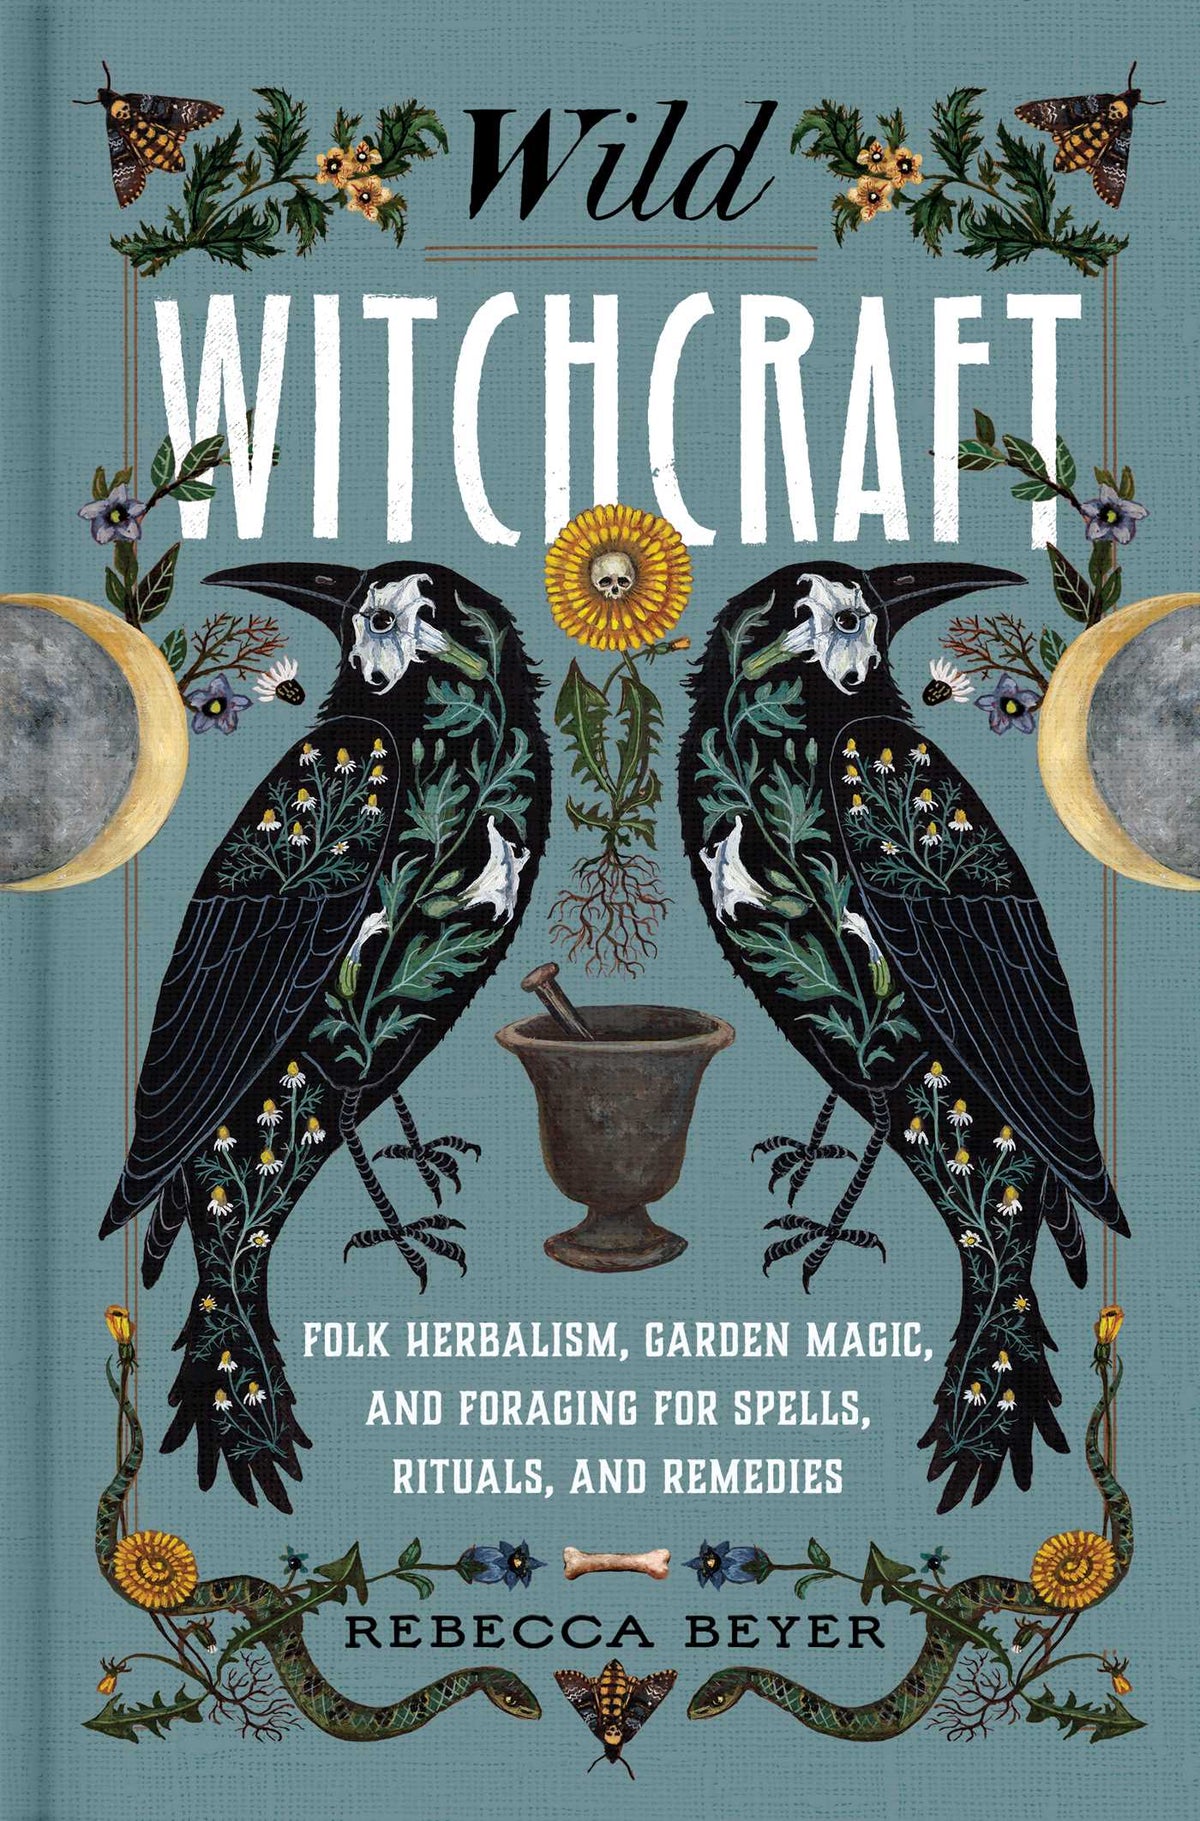 THE WITCH OF THE WOODS: Spells, Charms, Divination